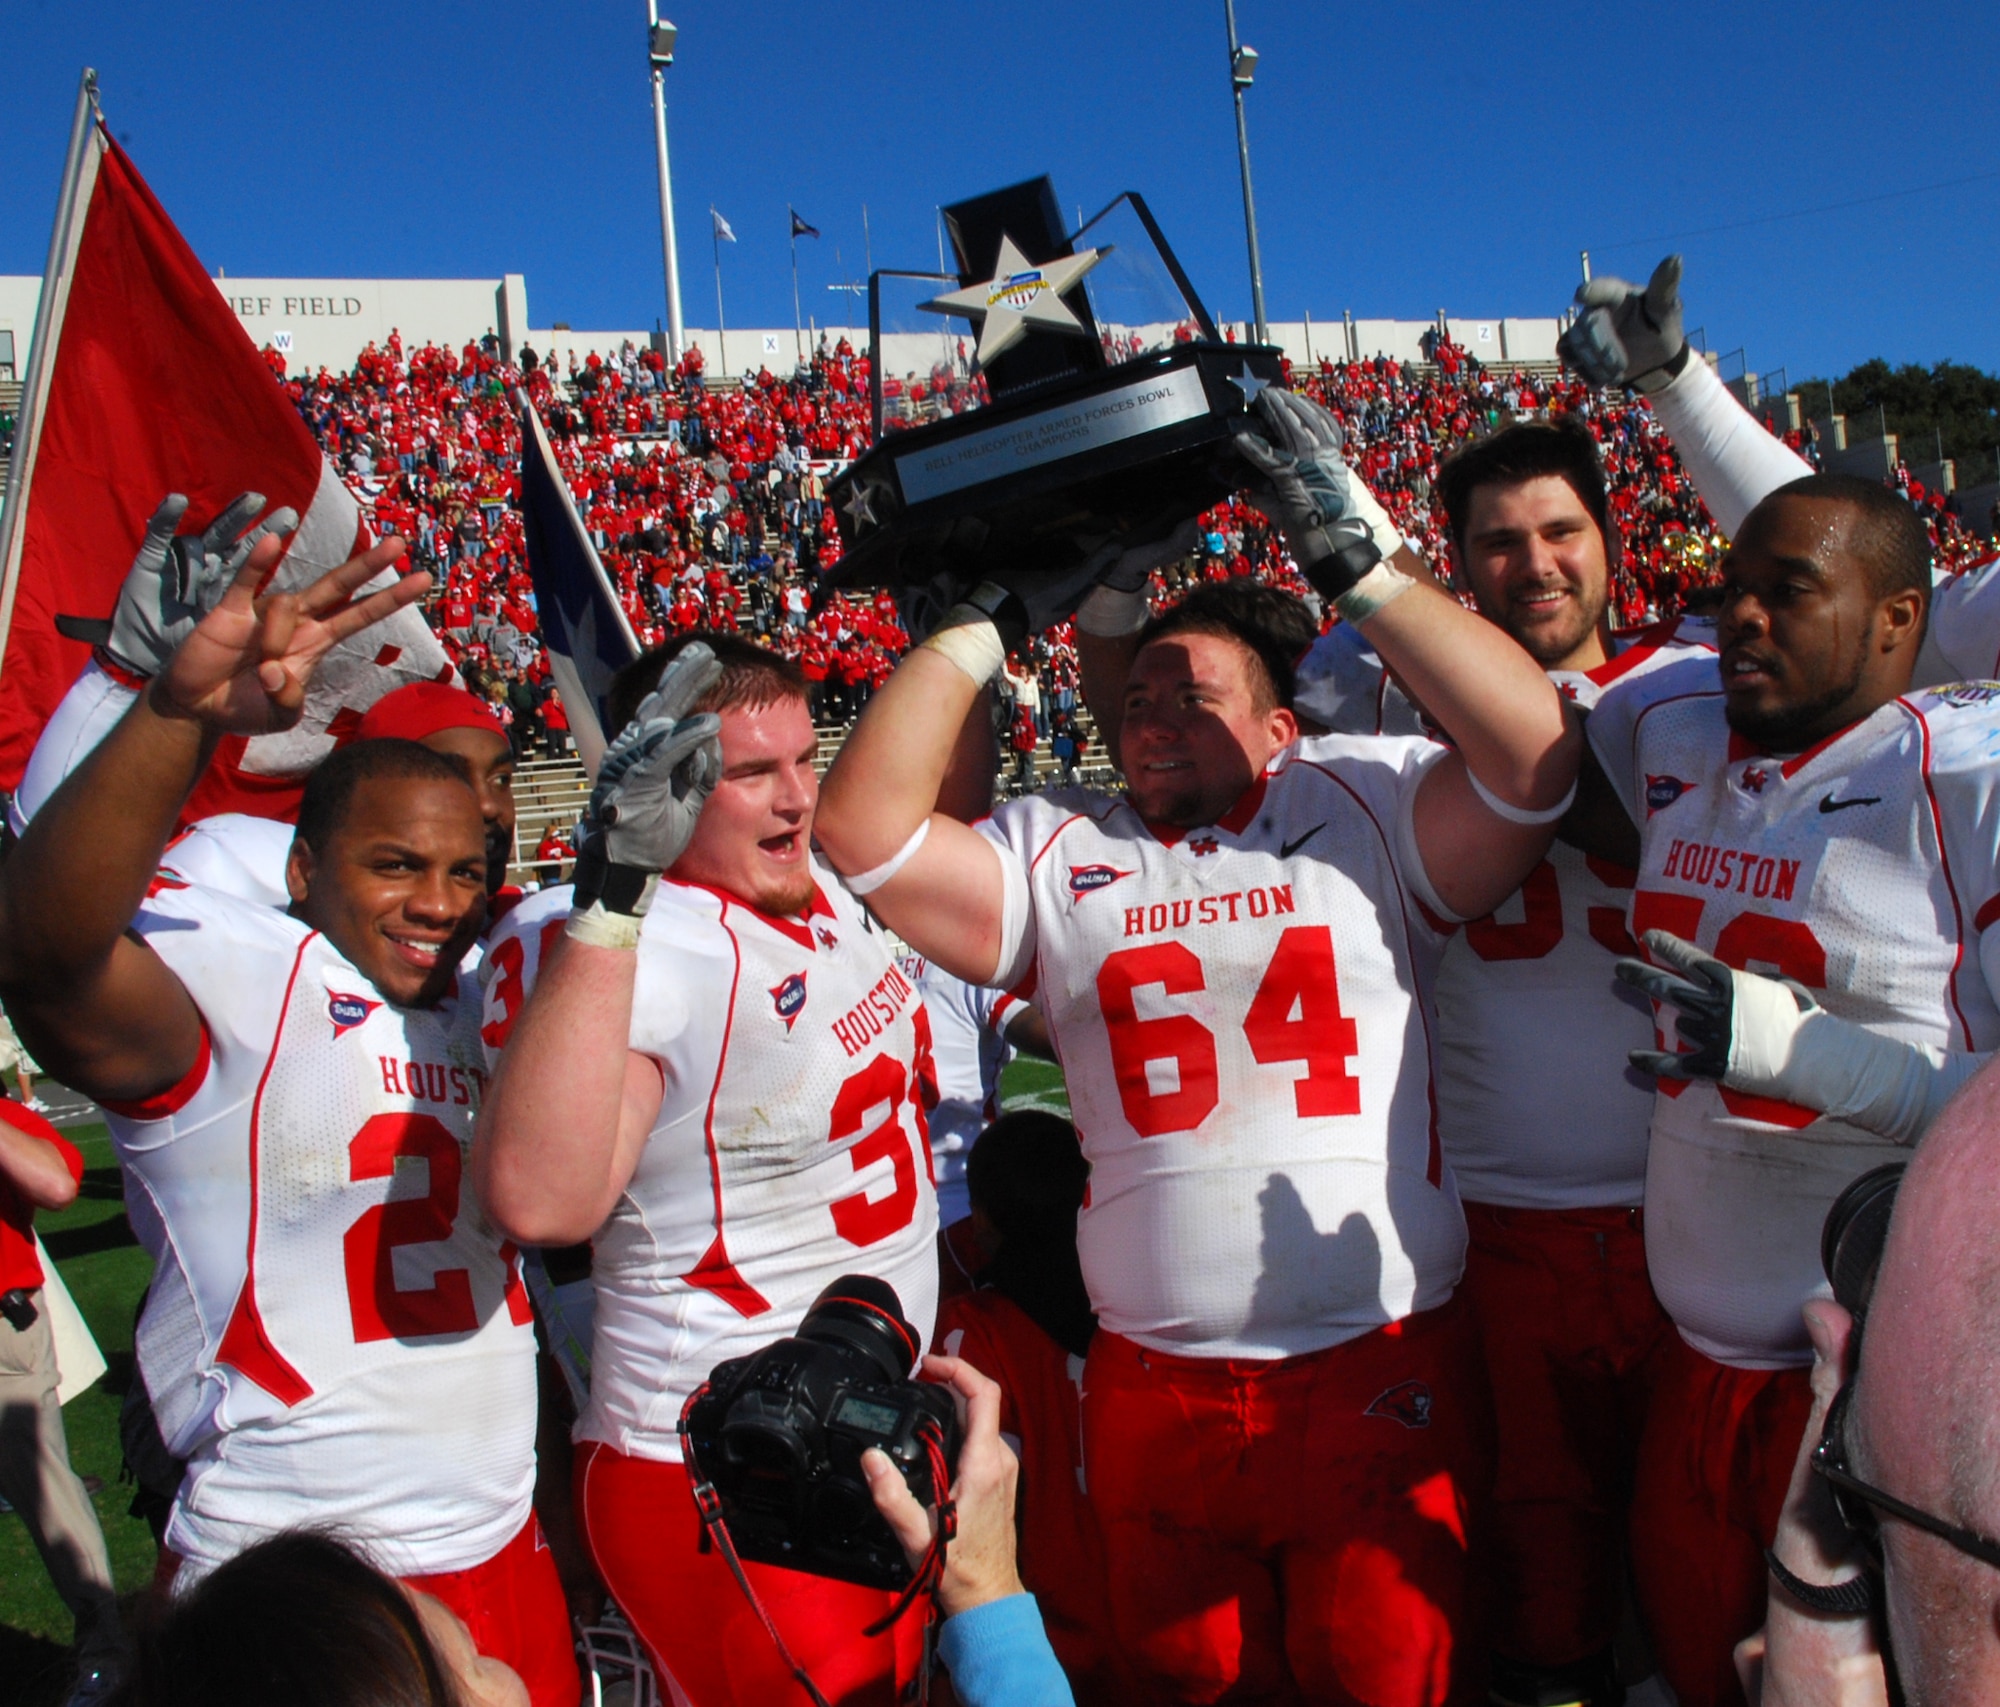 University of Houston cougars reveled in the glory as the new Armed Forces Bowl champions. Houston beat the Air Force Academy, 34 to 28 at Fort Worth's Amon Carter Stadium on New Year's Eve. (U. S. Air Force Photo/Tech. Sgt. Julie Briden-Garcia)